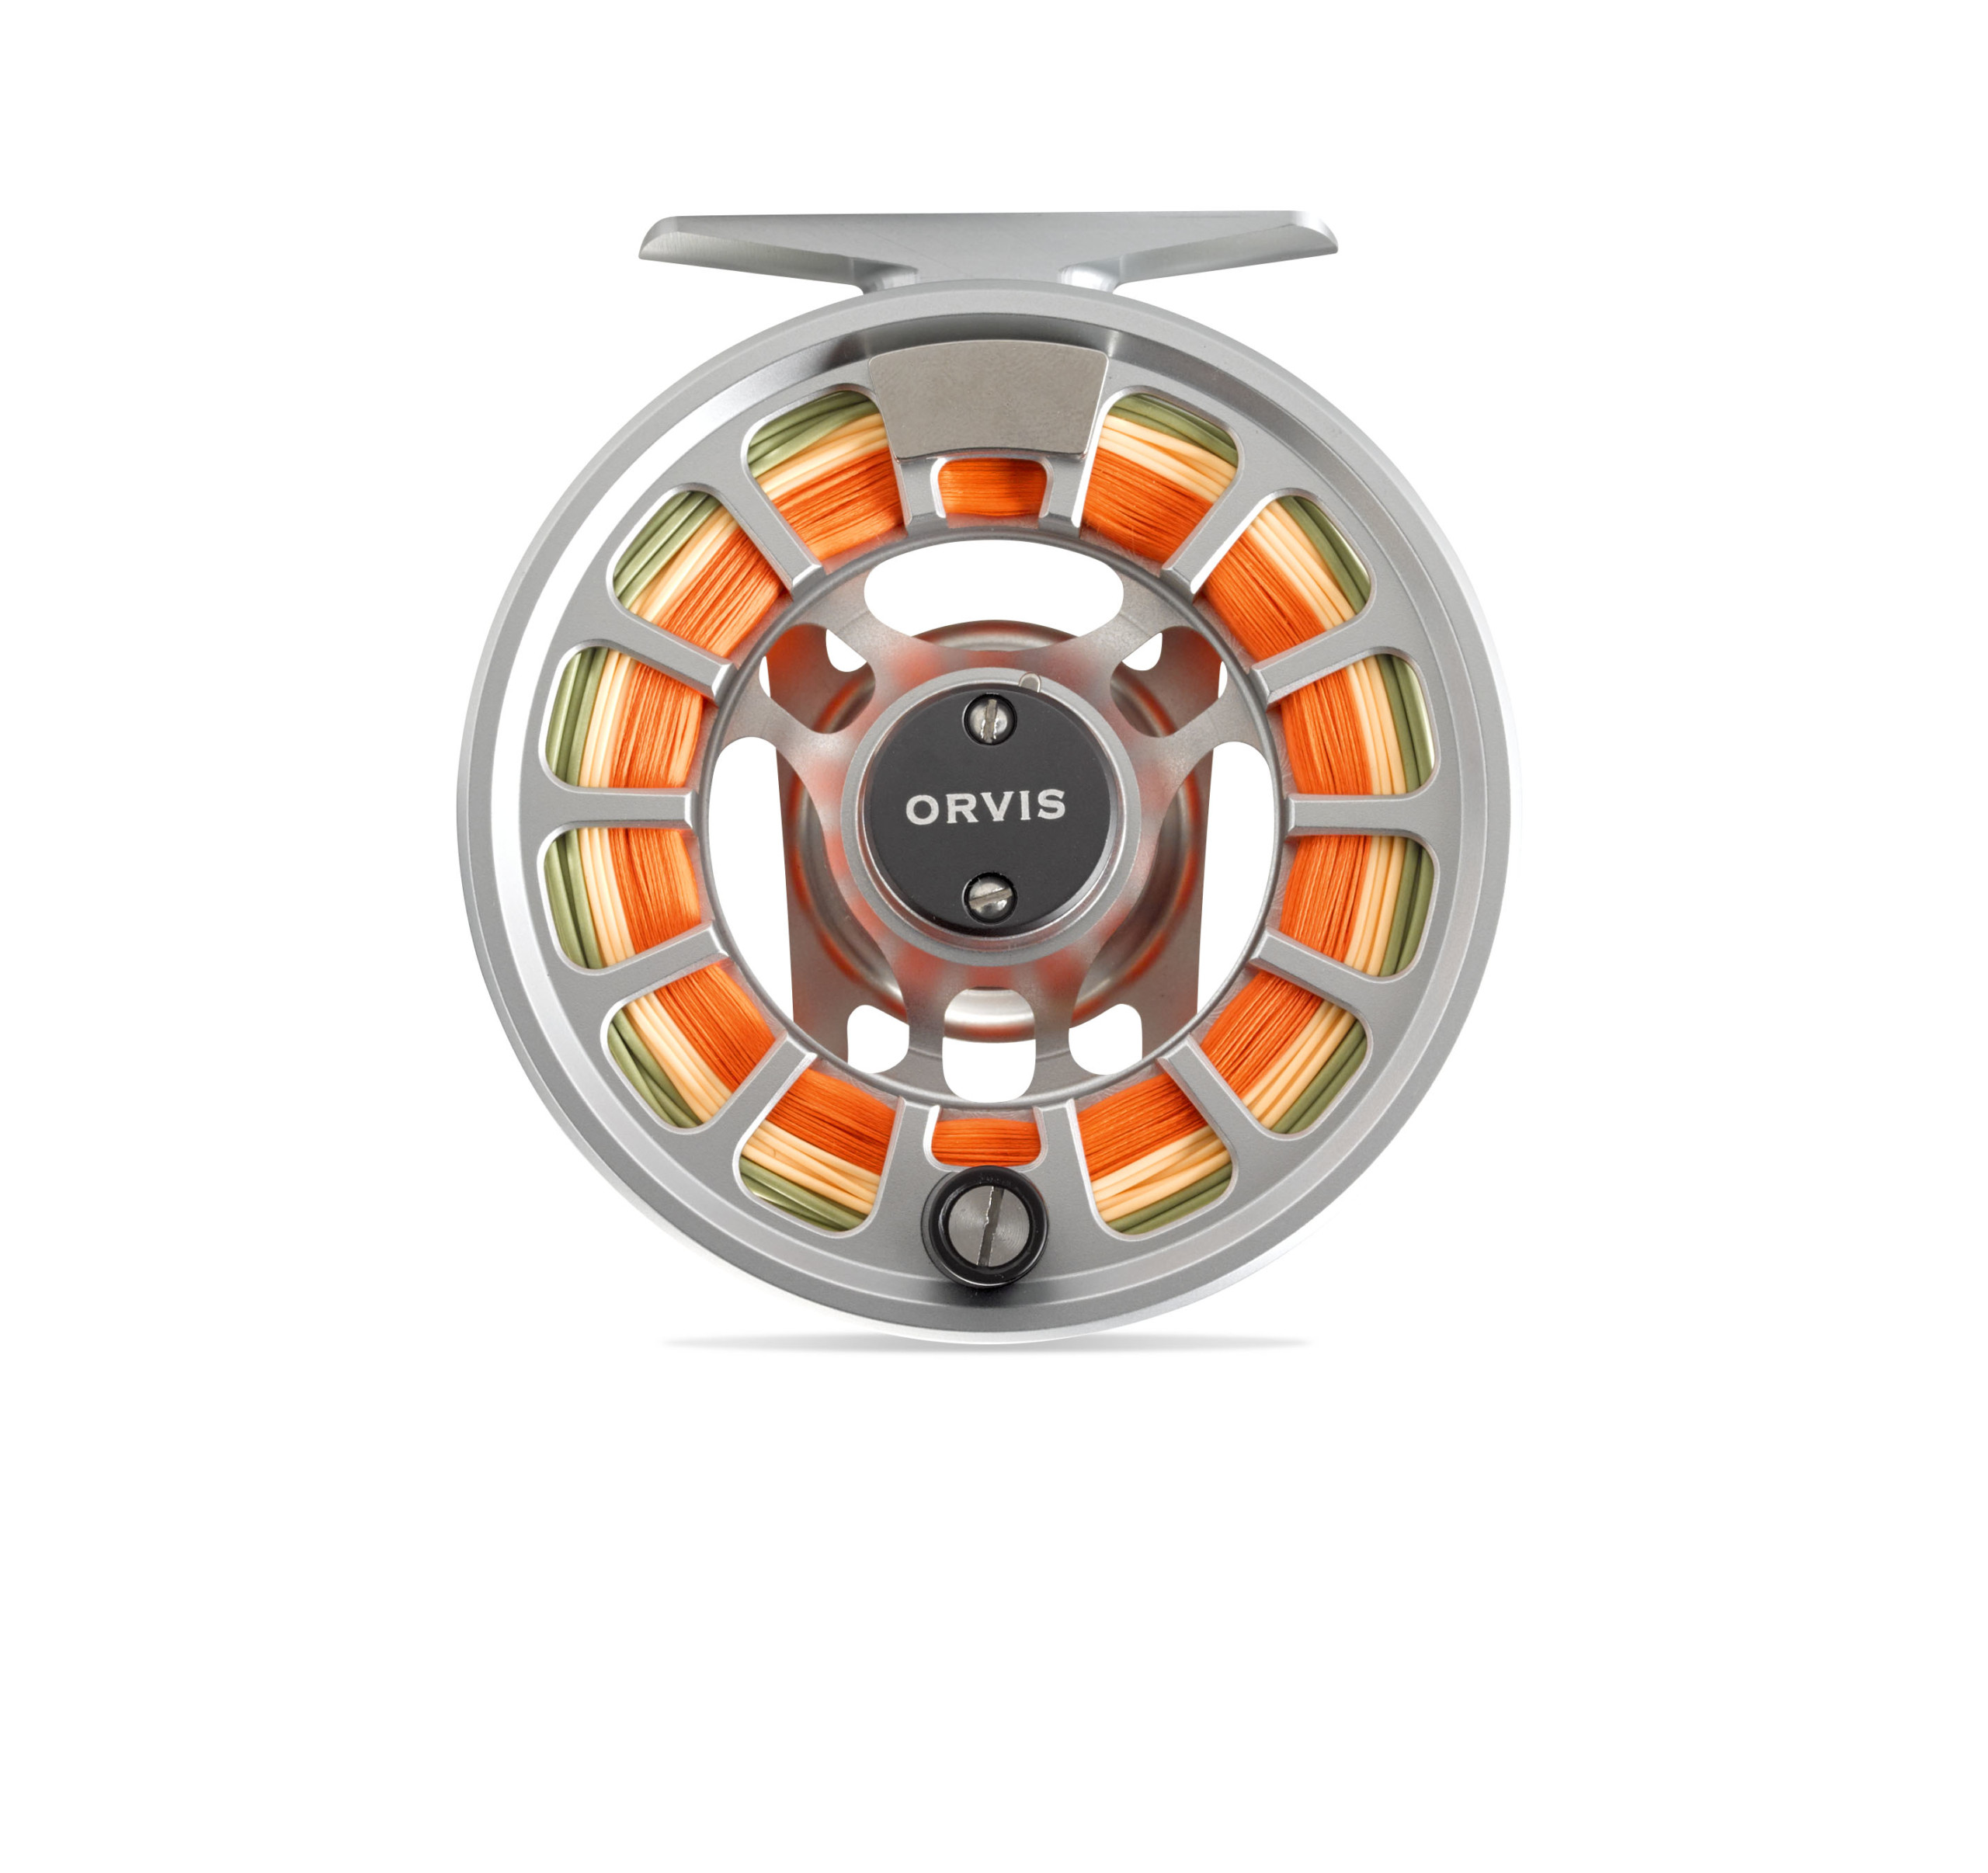 Orvis Hydros SL IV Fly Fishing Reel for Sale - sporting goods - by